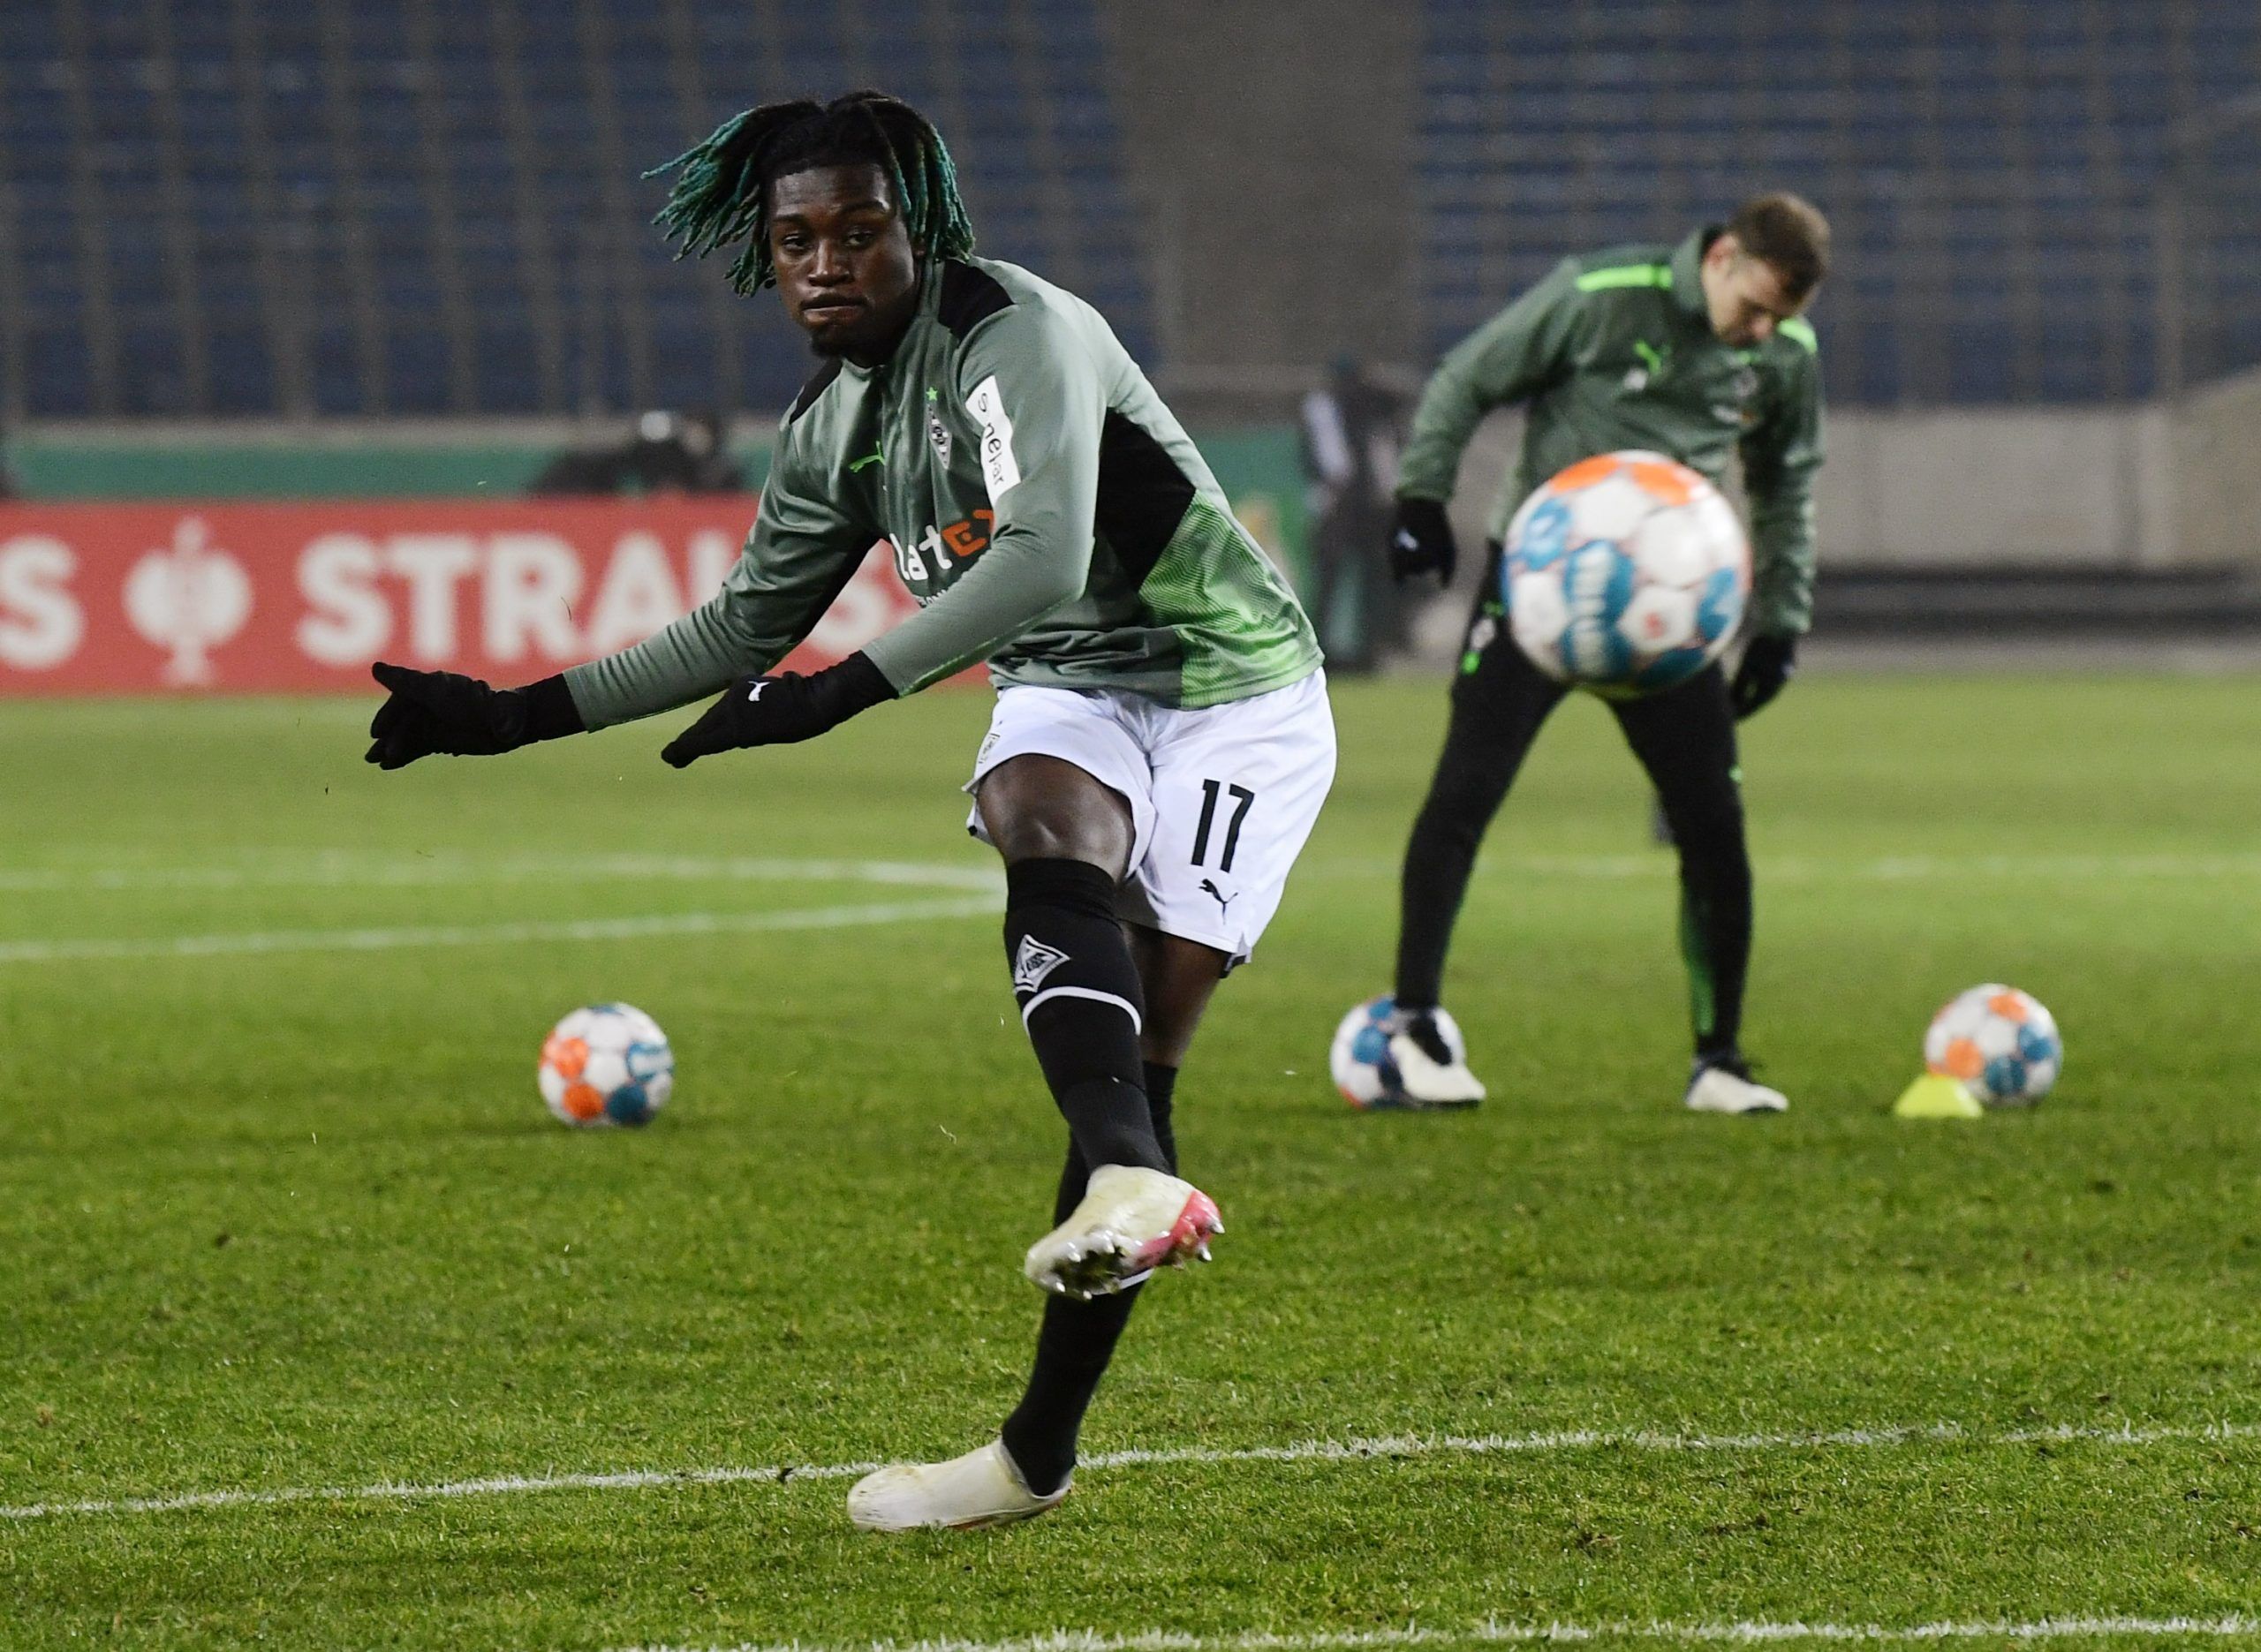 Soccer Football - DFB Cup - Hannover 96 v Borussia Moenchengladbach - HDI-Arena, Hannover, Germany - January 19, 2022 Borussia Moenchengladbach's Kouadio Kone during the warm up before the match REUTERS/Fabian Bimmer DFB REGULATIONS PROHIBIT ANY USE OF PHOTOGRAPHS AS IMAGE SEQUENCES AND/OR QUASI-VIDEO.